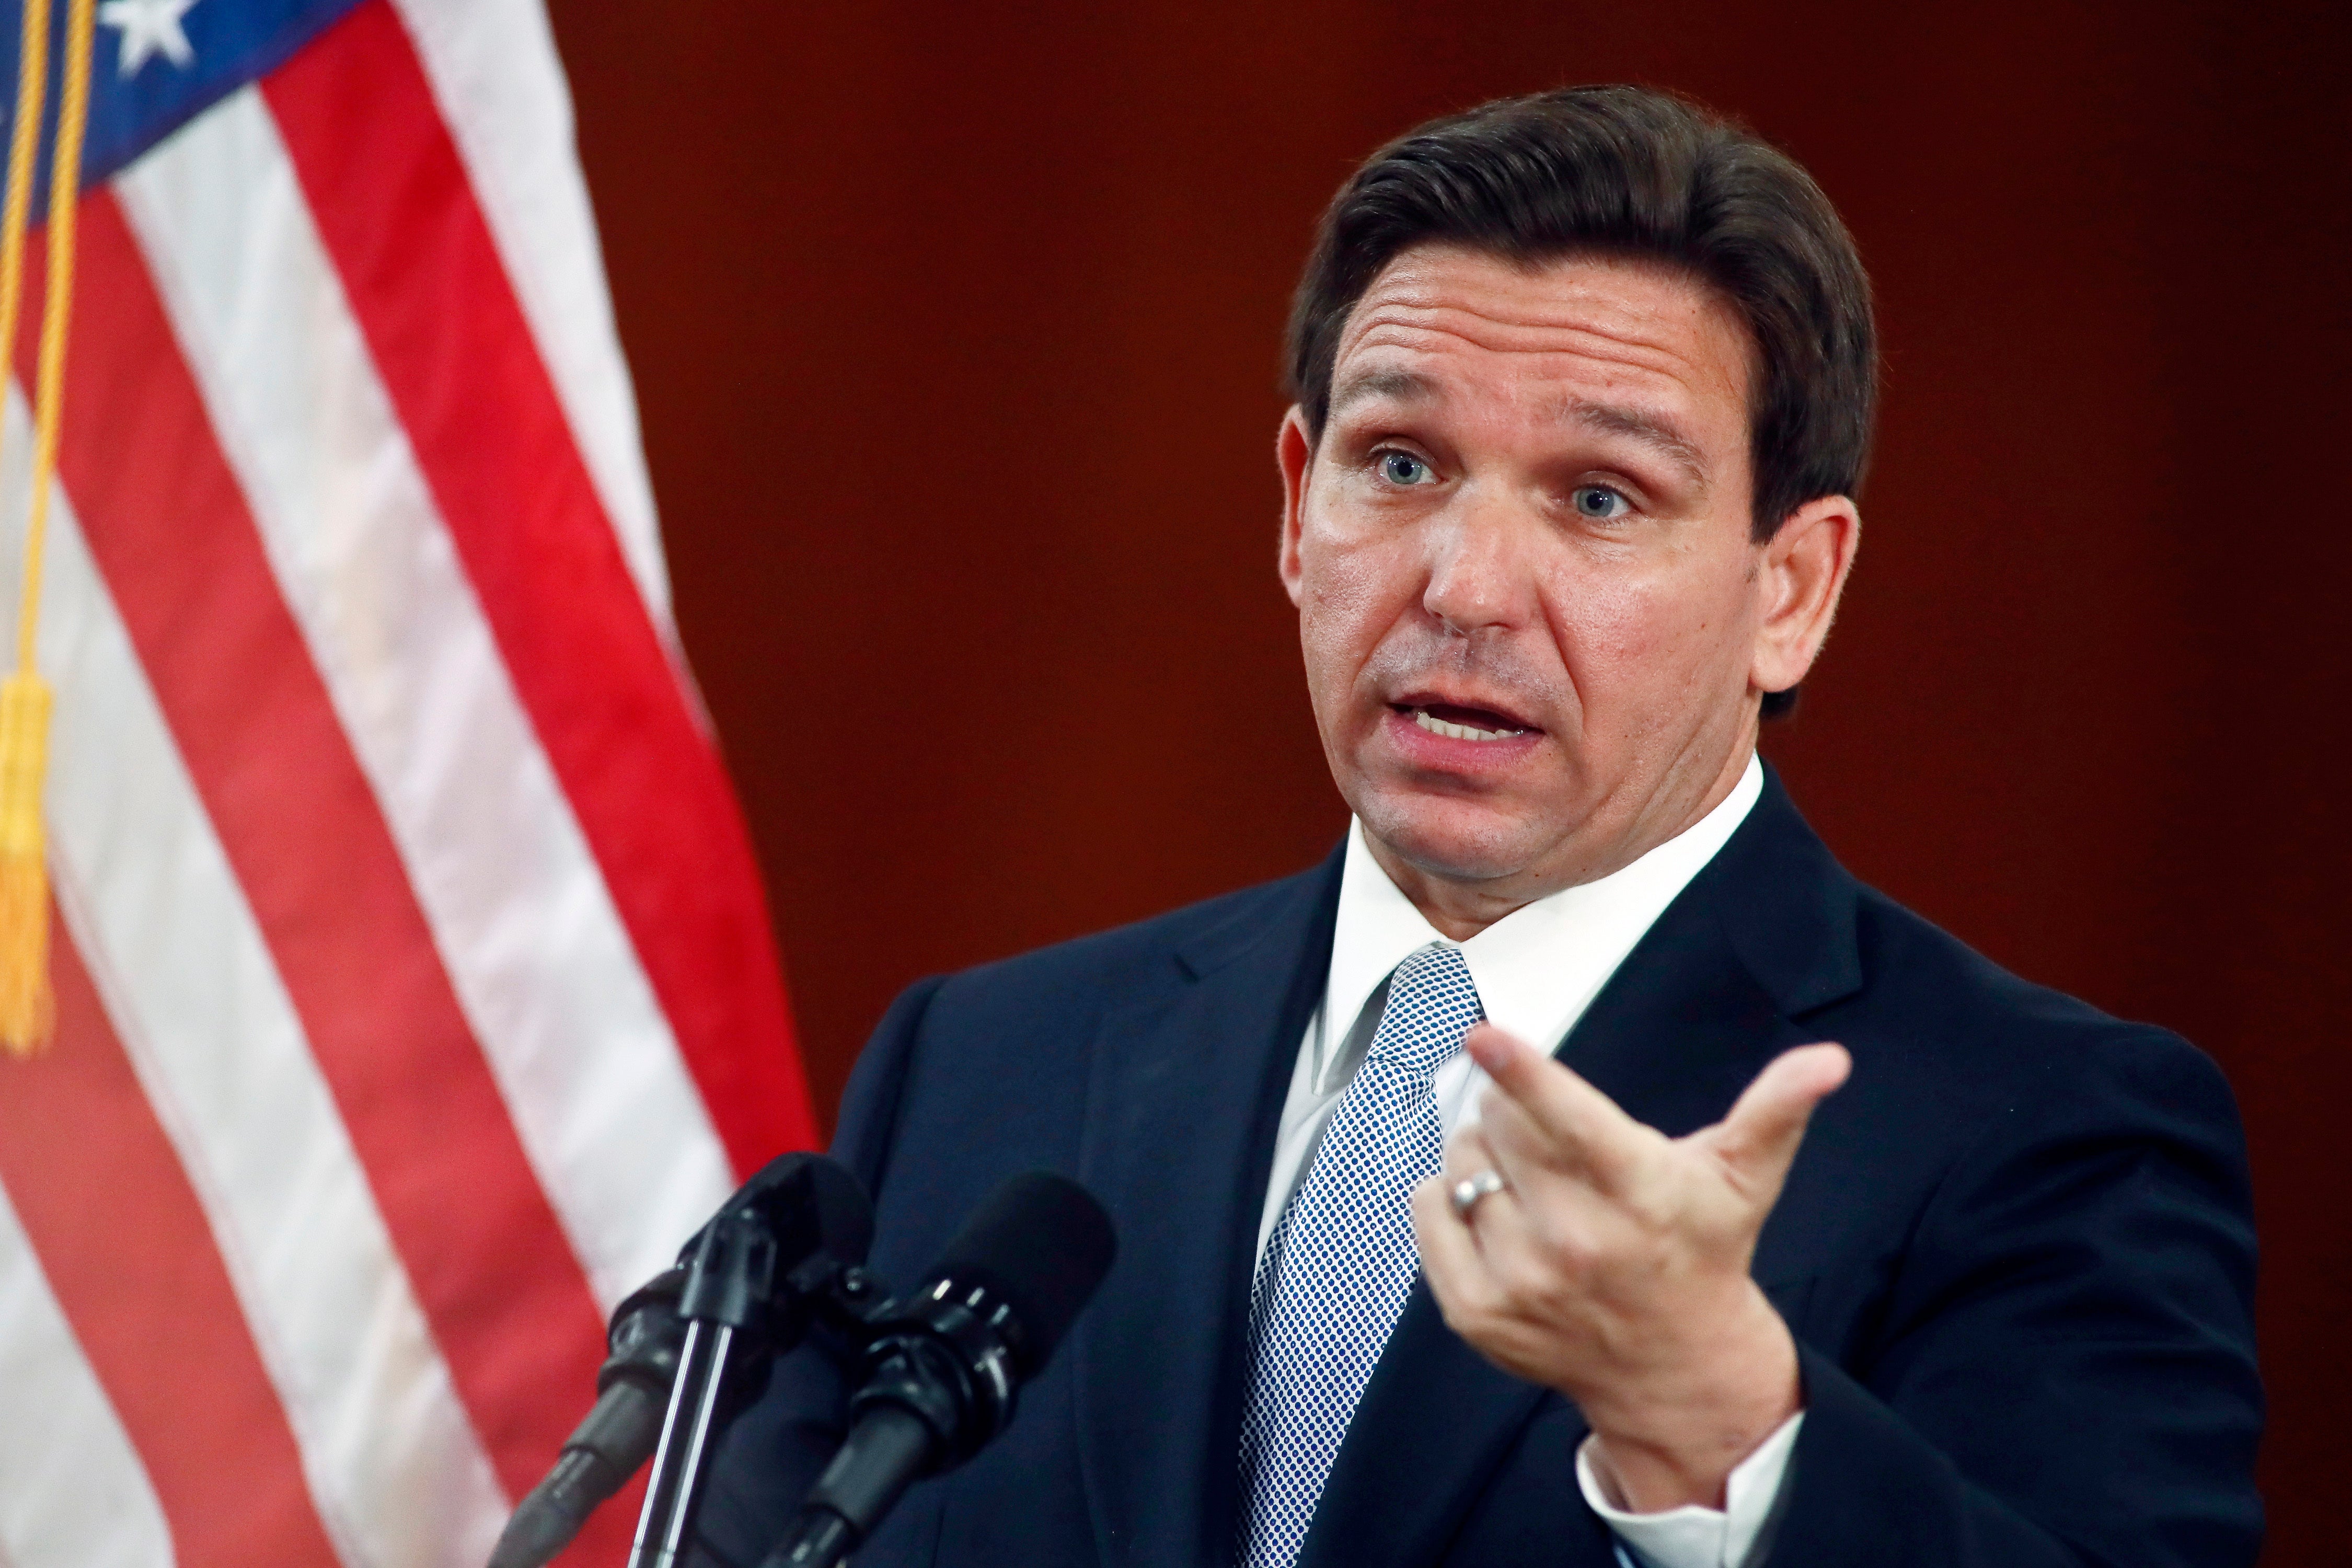 Florida Gov. Ron DeSantis answers questions from the media, on March 7, 2023, at the state Capitol in Tallahassee. He signed a new bill to limit the number of challenges that Florida residents without children can make to one per month